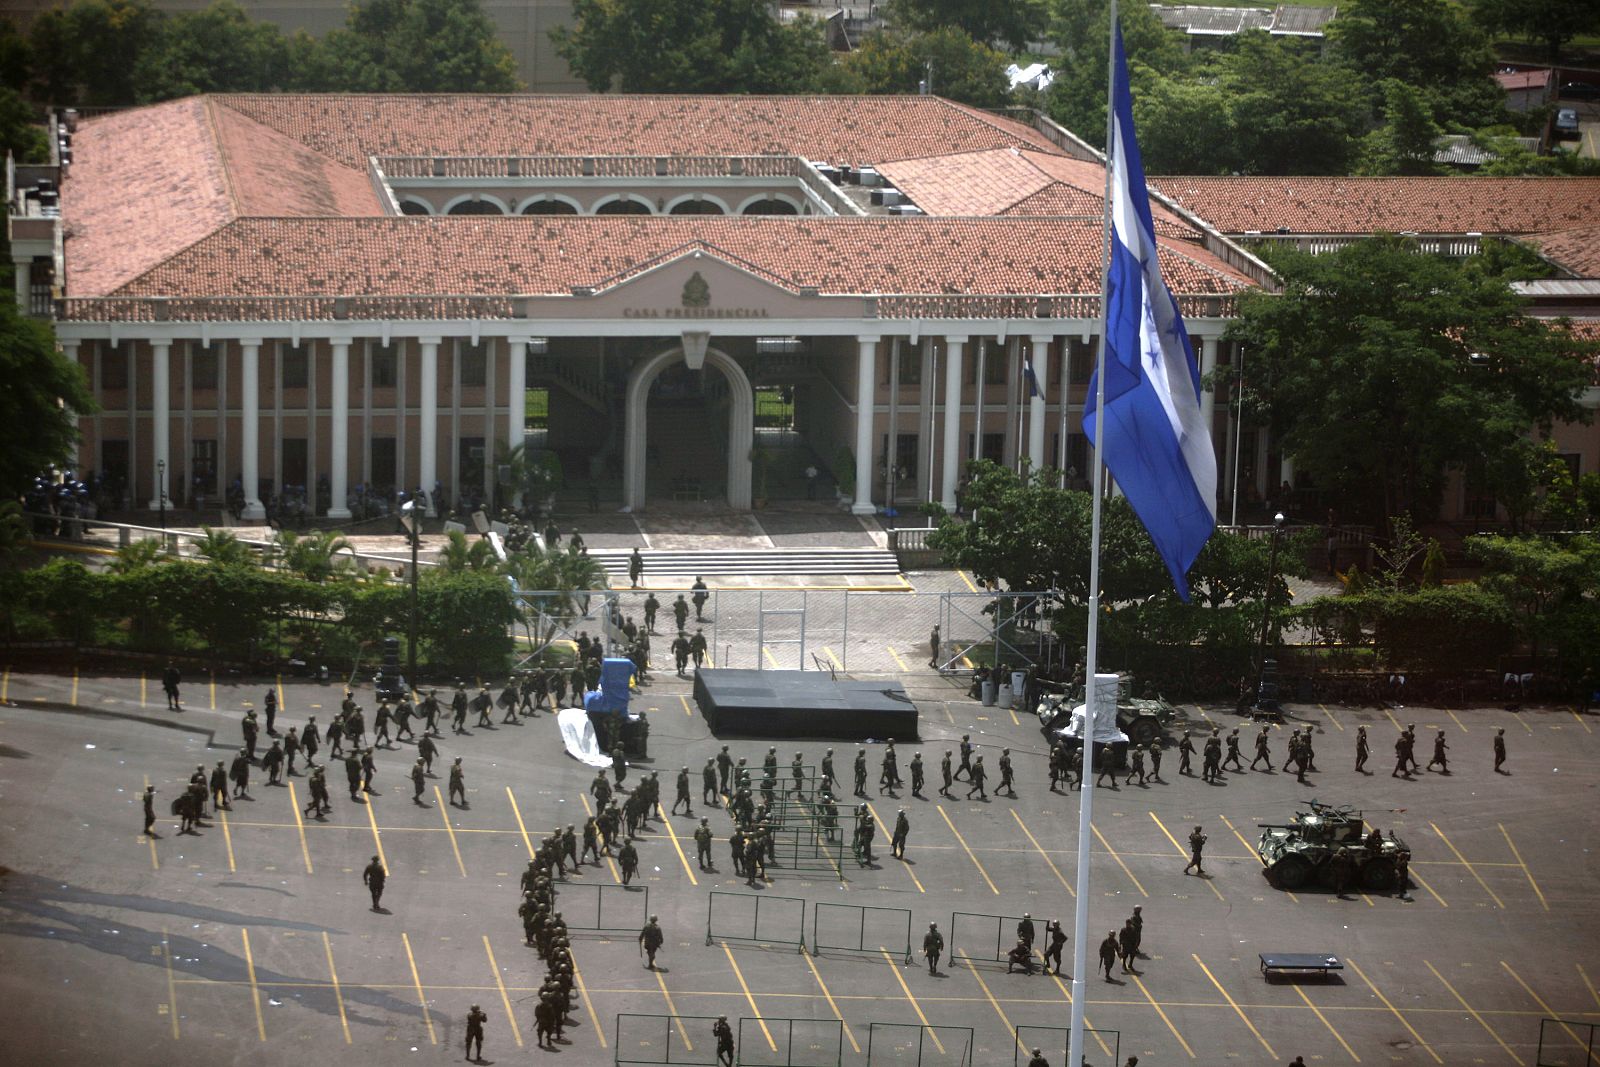 Soldiers walk in front of Presidential residence in Tegucigalpa